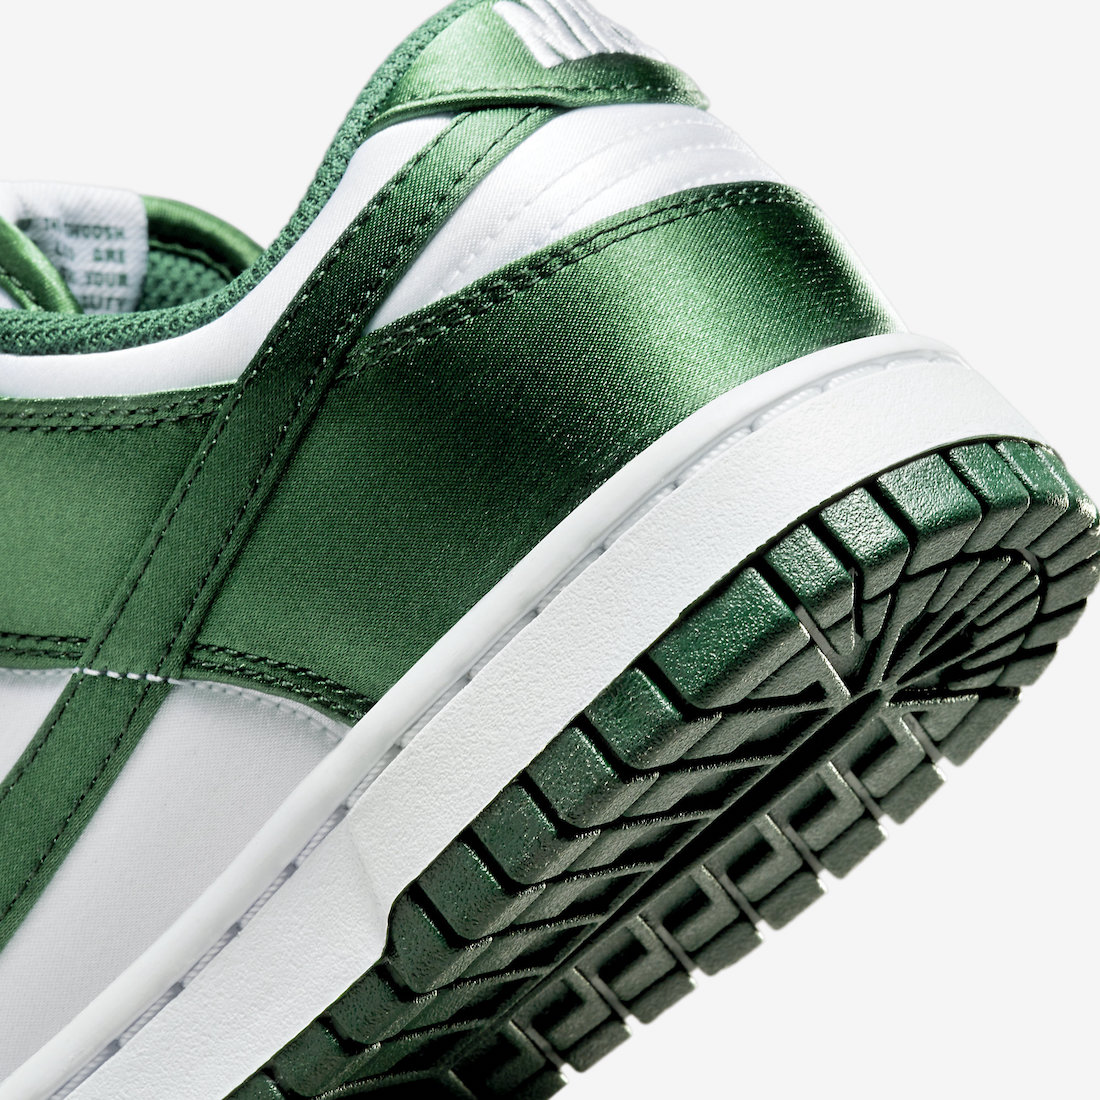 Nike Dunk Low Satin Green DX5931-100 Release Date | SBD